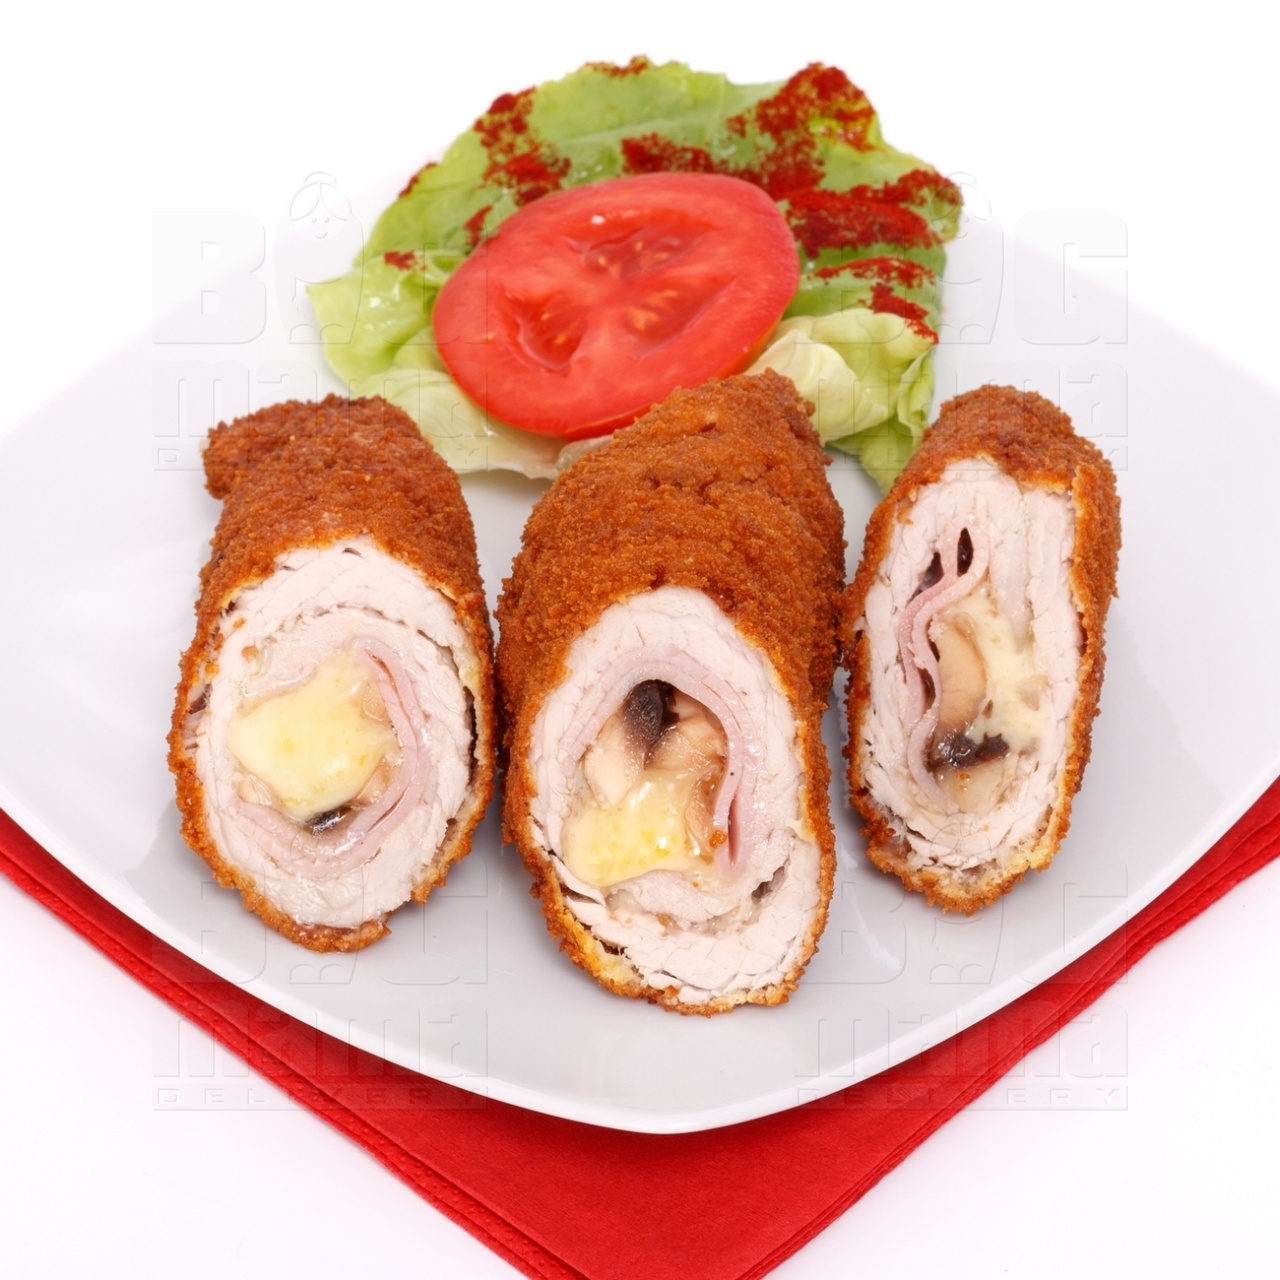 Product #6 image - Cordon Bleu made of chicken meat